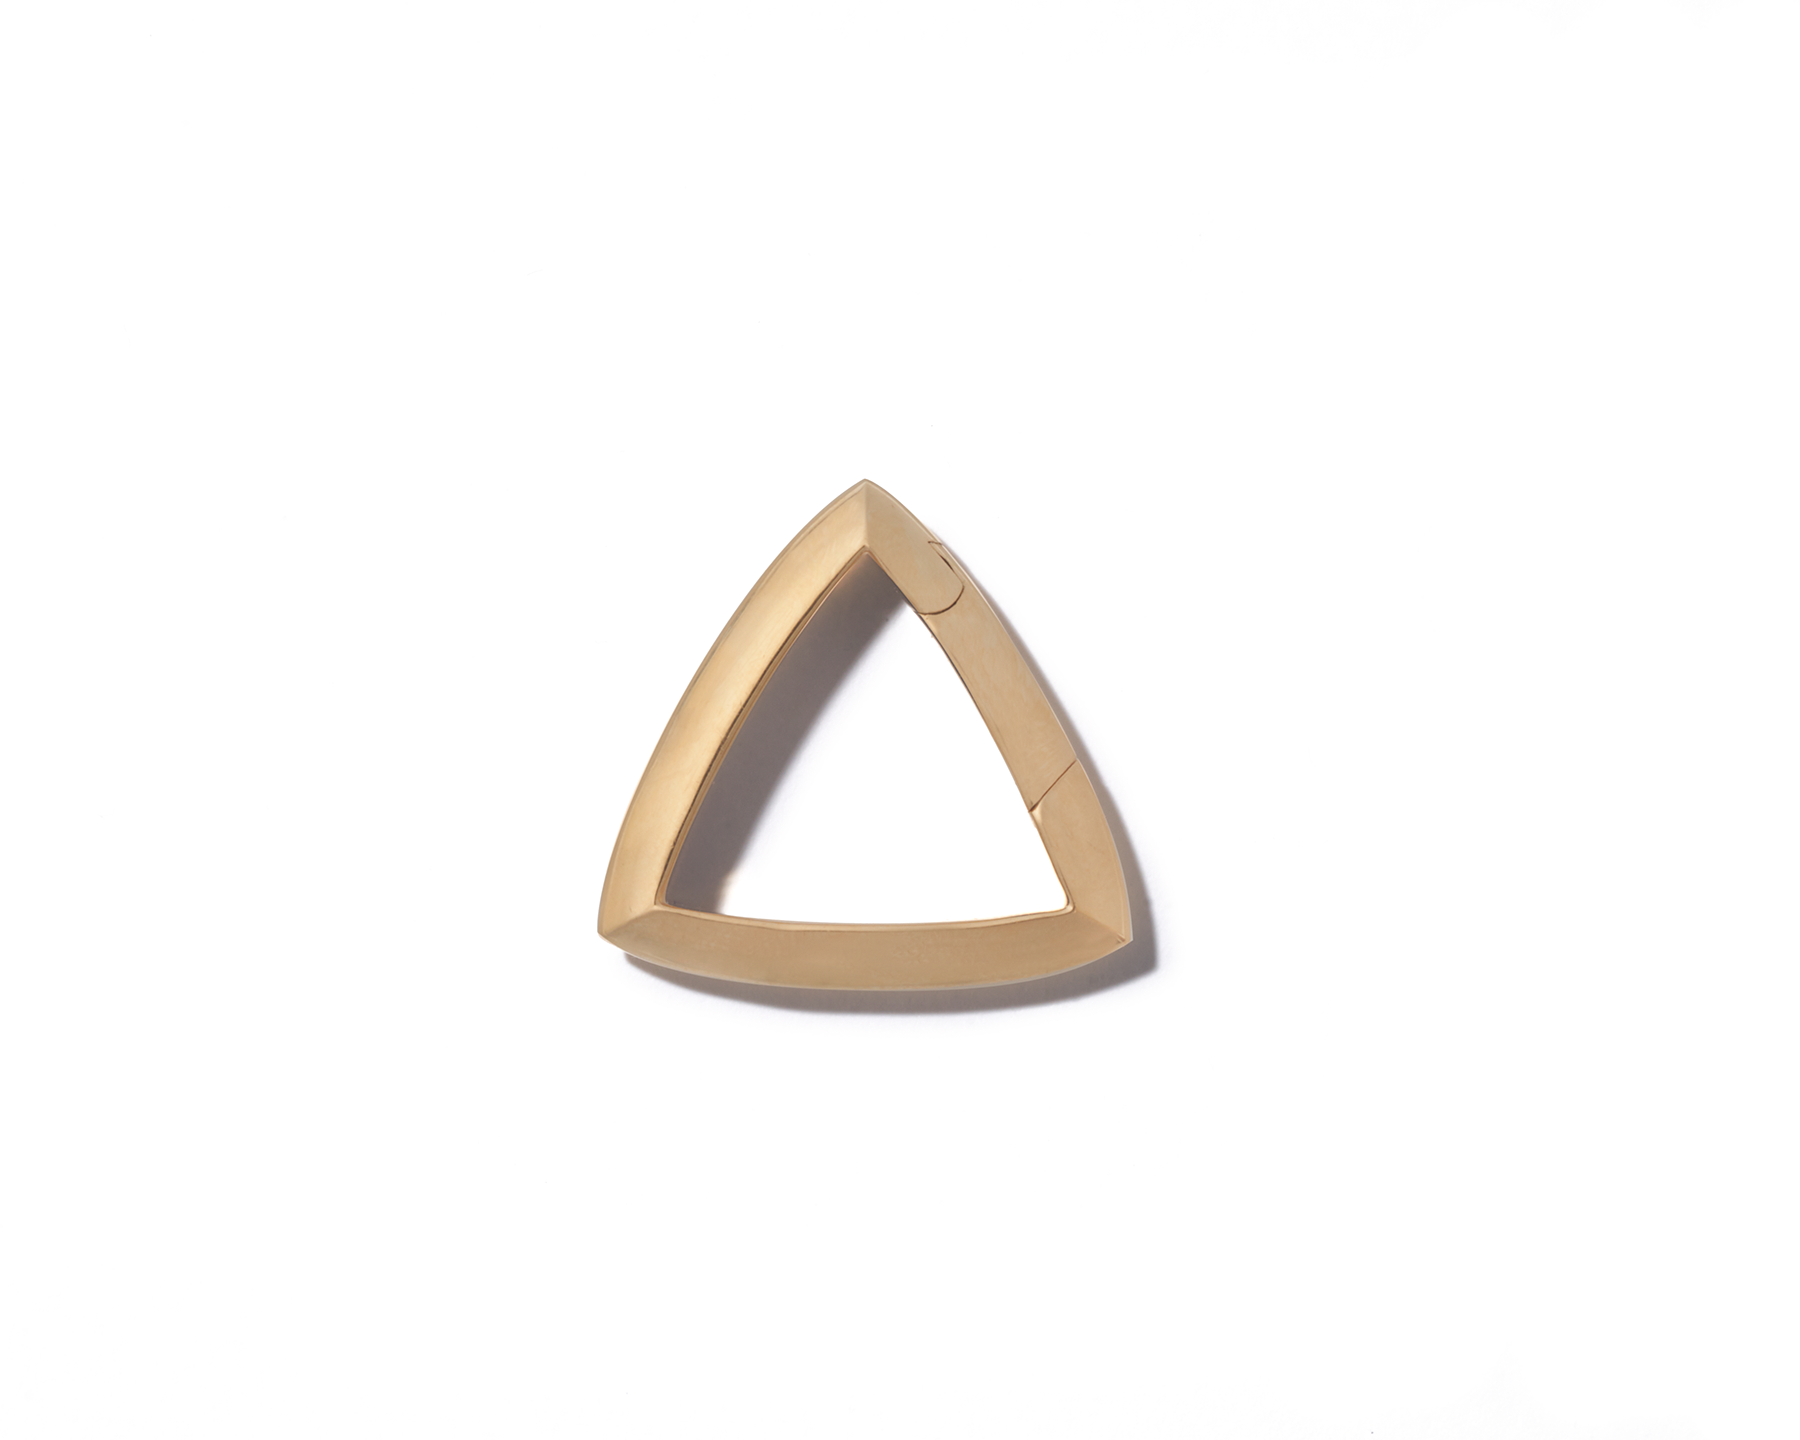 Rose gold triangle lock against white backdrop